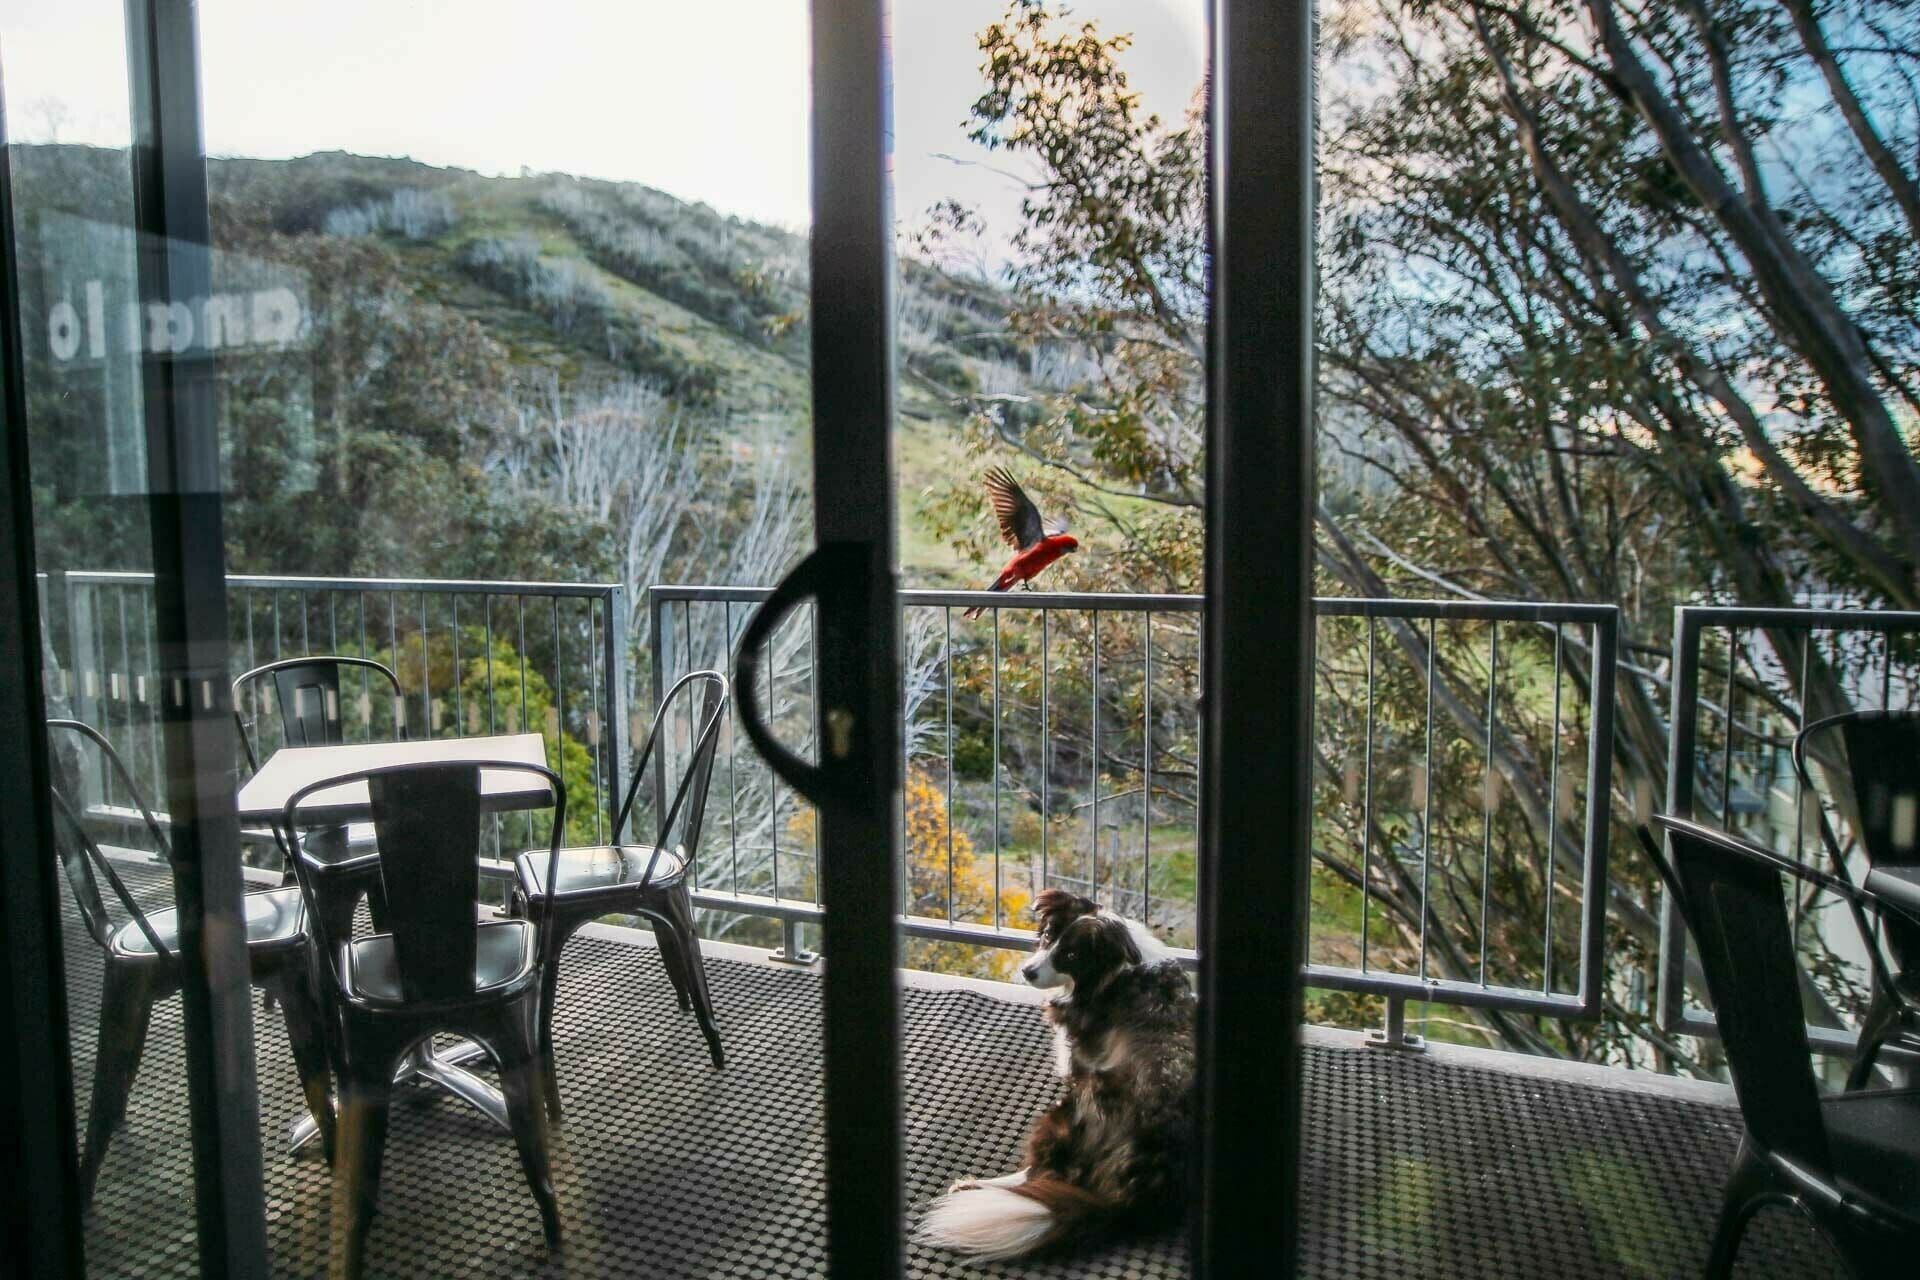 skye on the balcony of Diana Alpine Lodge, shot by Kale Munro, Tourism North East, Falls Creek, High Country, Victoria, dog, rosella, balcony